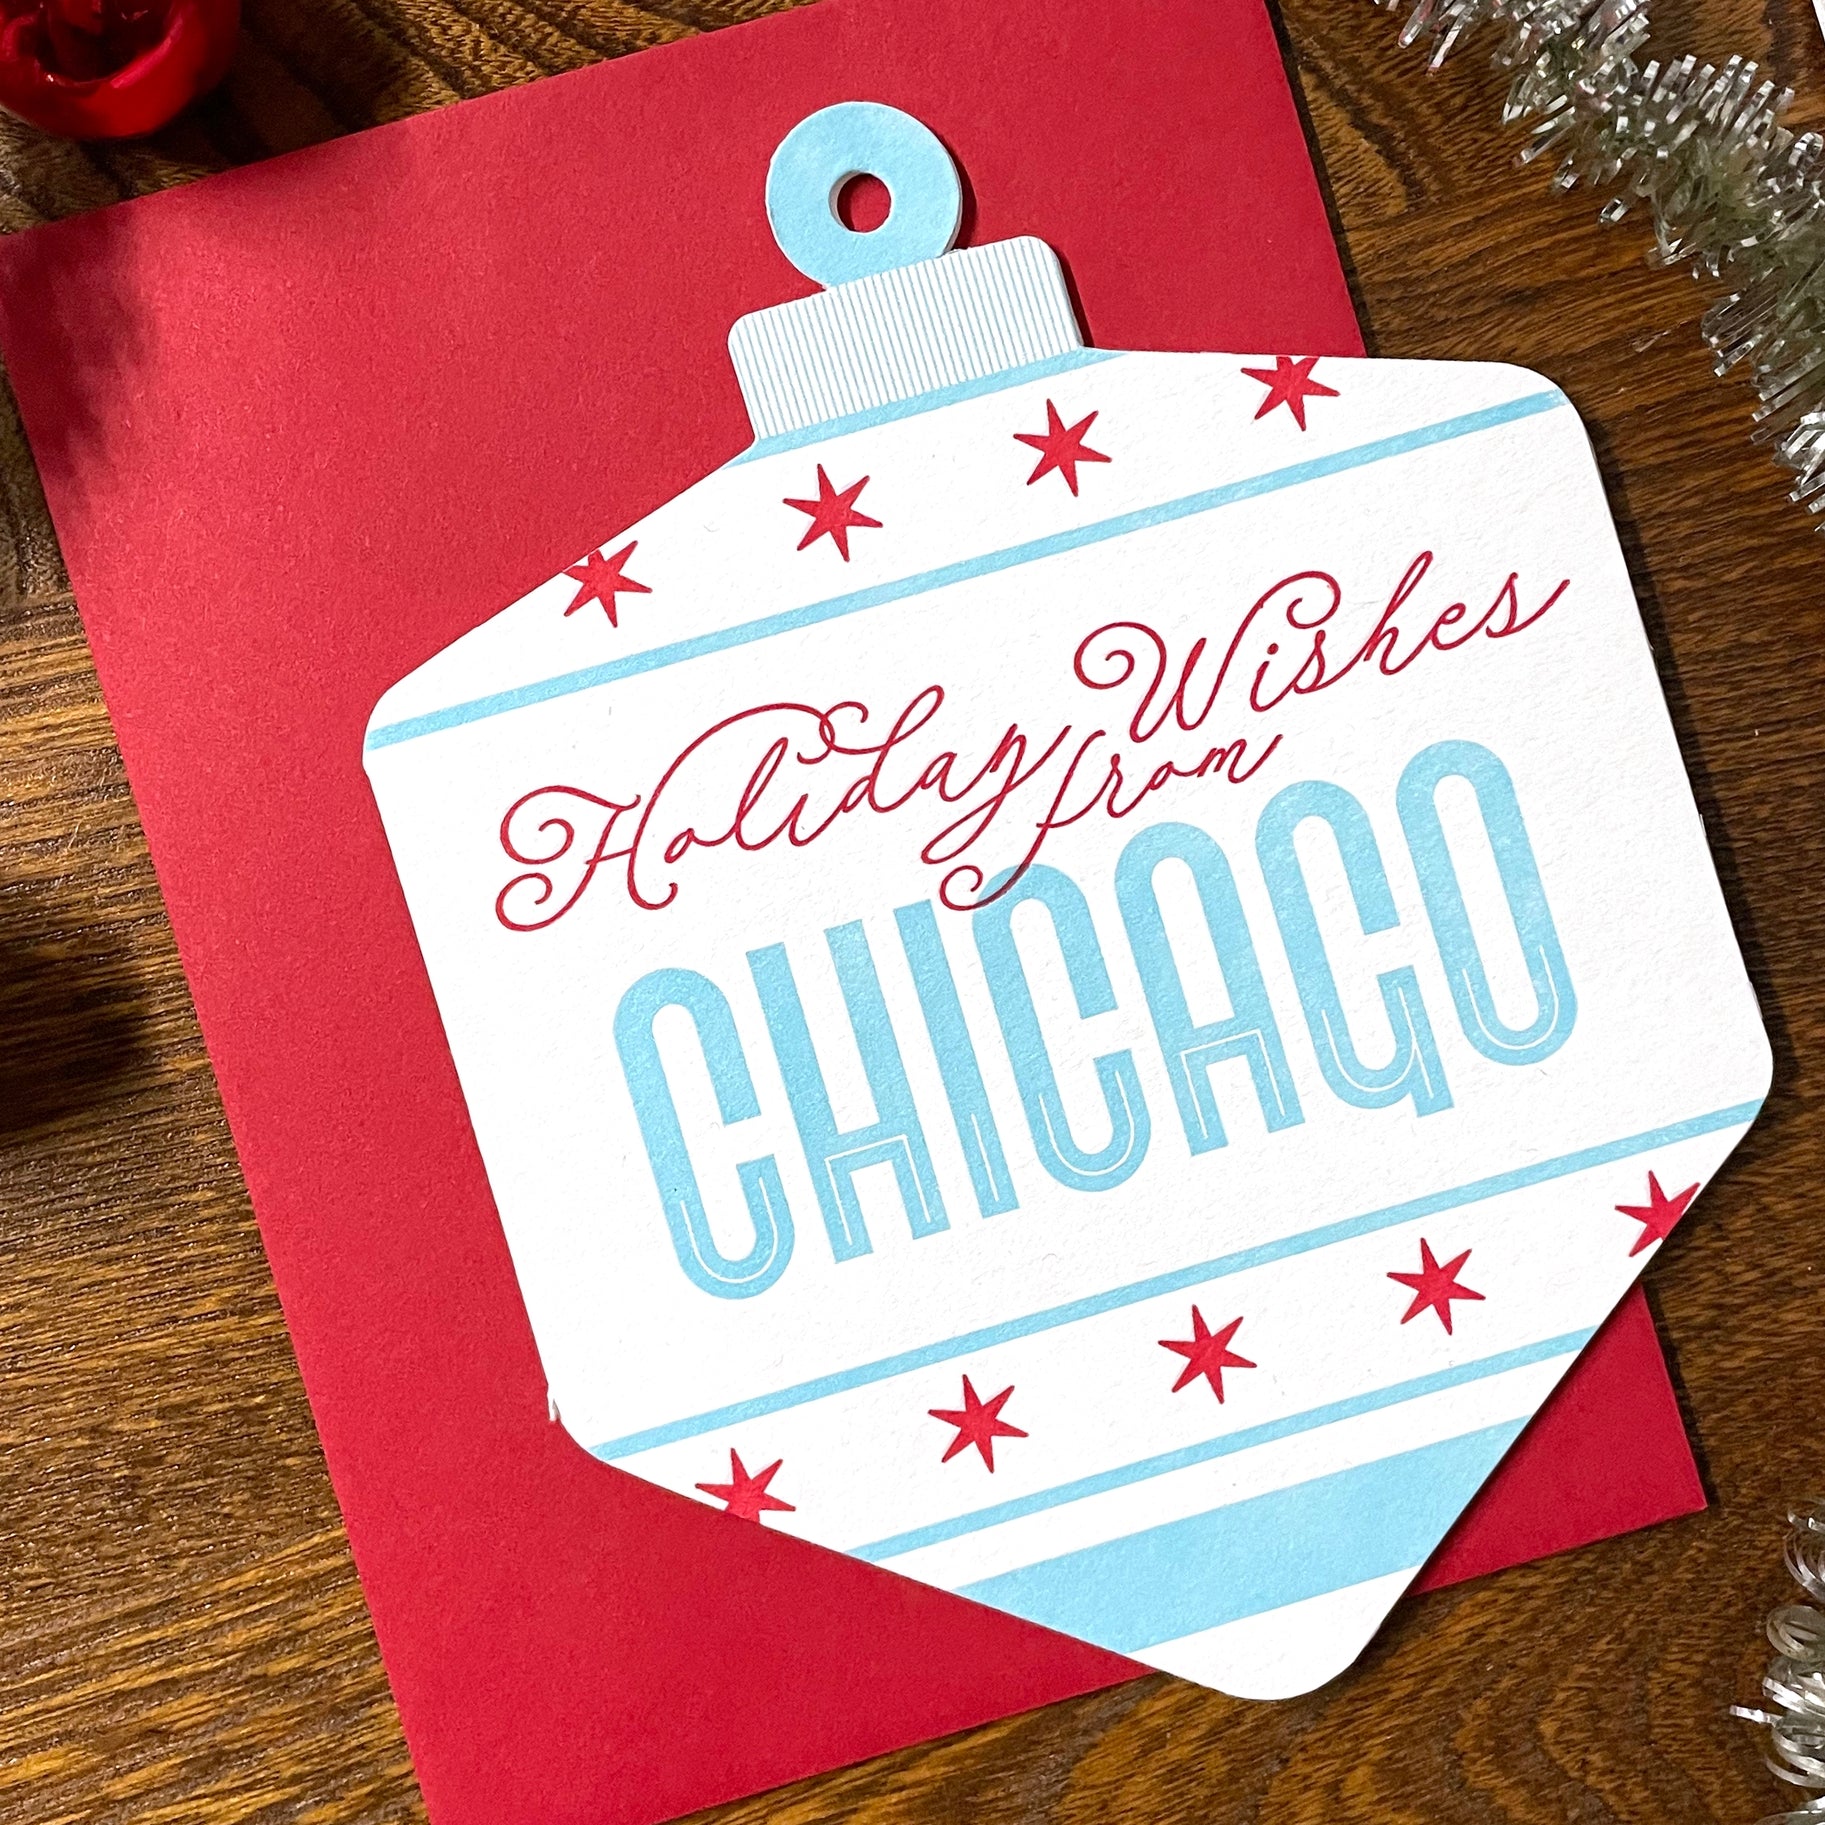 Chicago Holiday Ornament Box Card